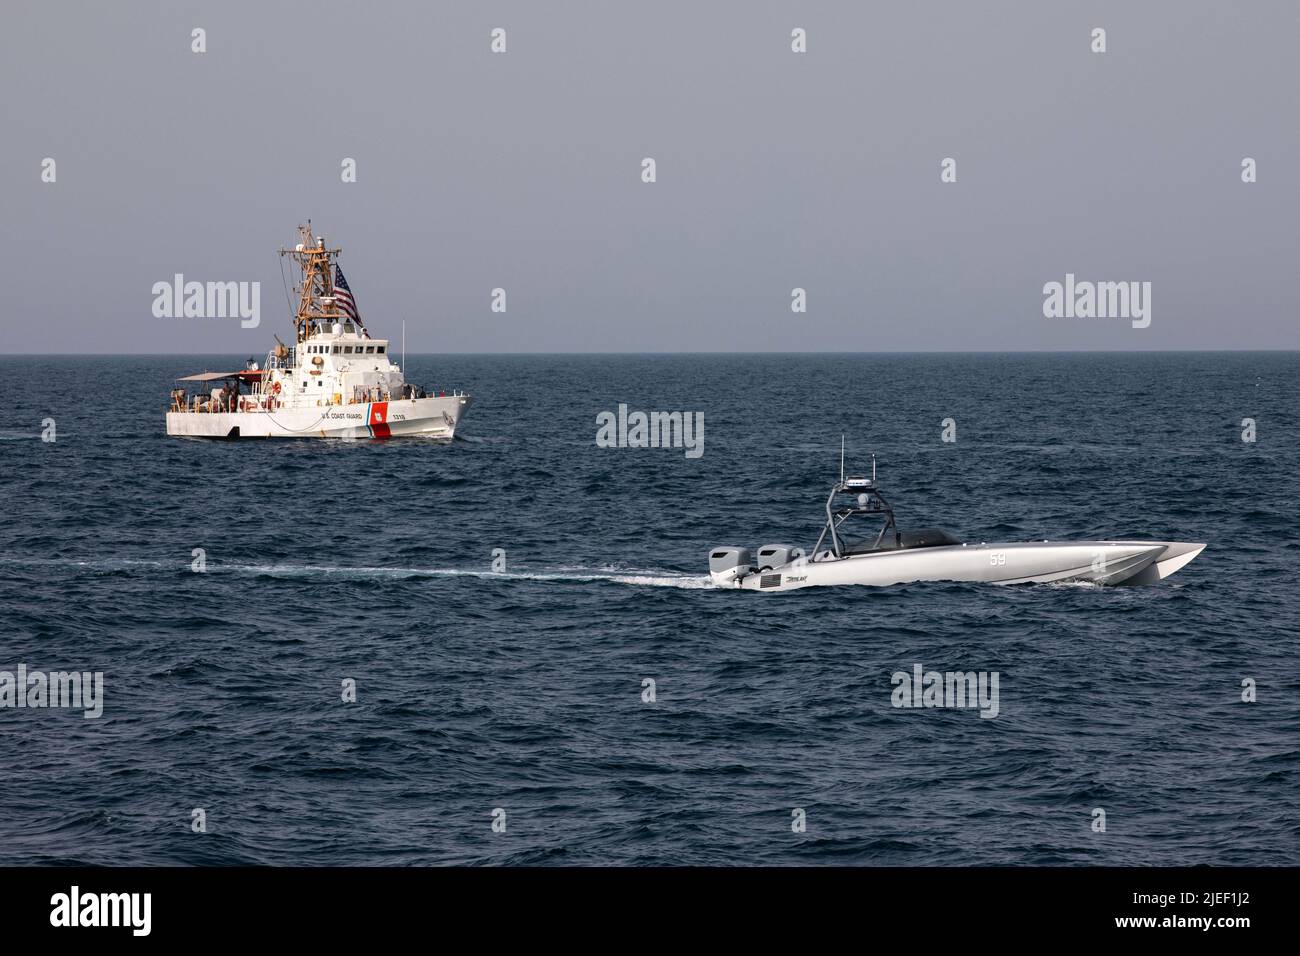 220626-A-JJ498-1228 ARABIAN GULF (June 26, 2022) A Devil Ray T-38 unmanned surface vessel and U.S. Coast Guard cutters USCGC Baranof (WPB 1318) sail in the Arabian Gulf, June 26. U.S. naval forces regularly operate across the Middle East region to help ensure security and stability. (U.S. Army photo by Spc. Ian Miller) Stock Photo